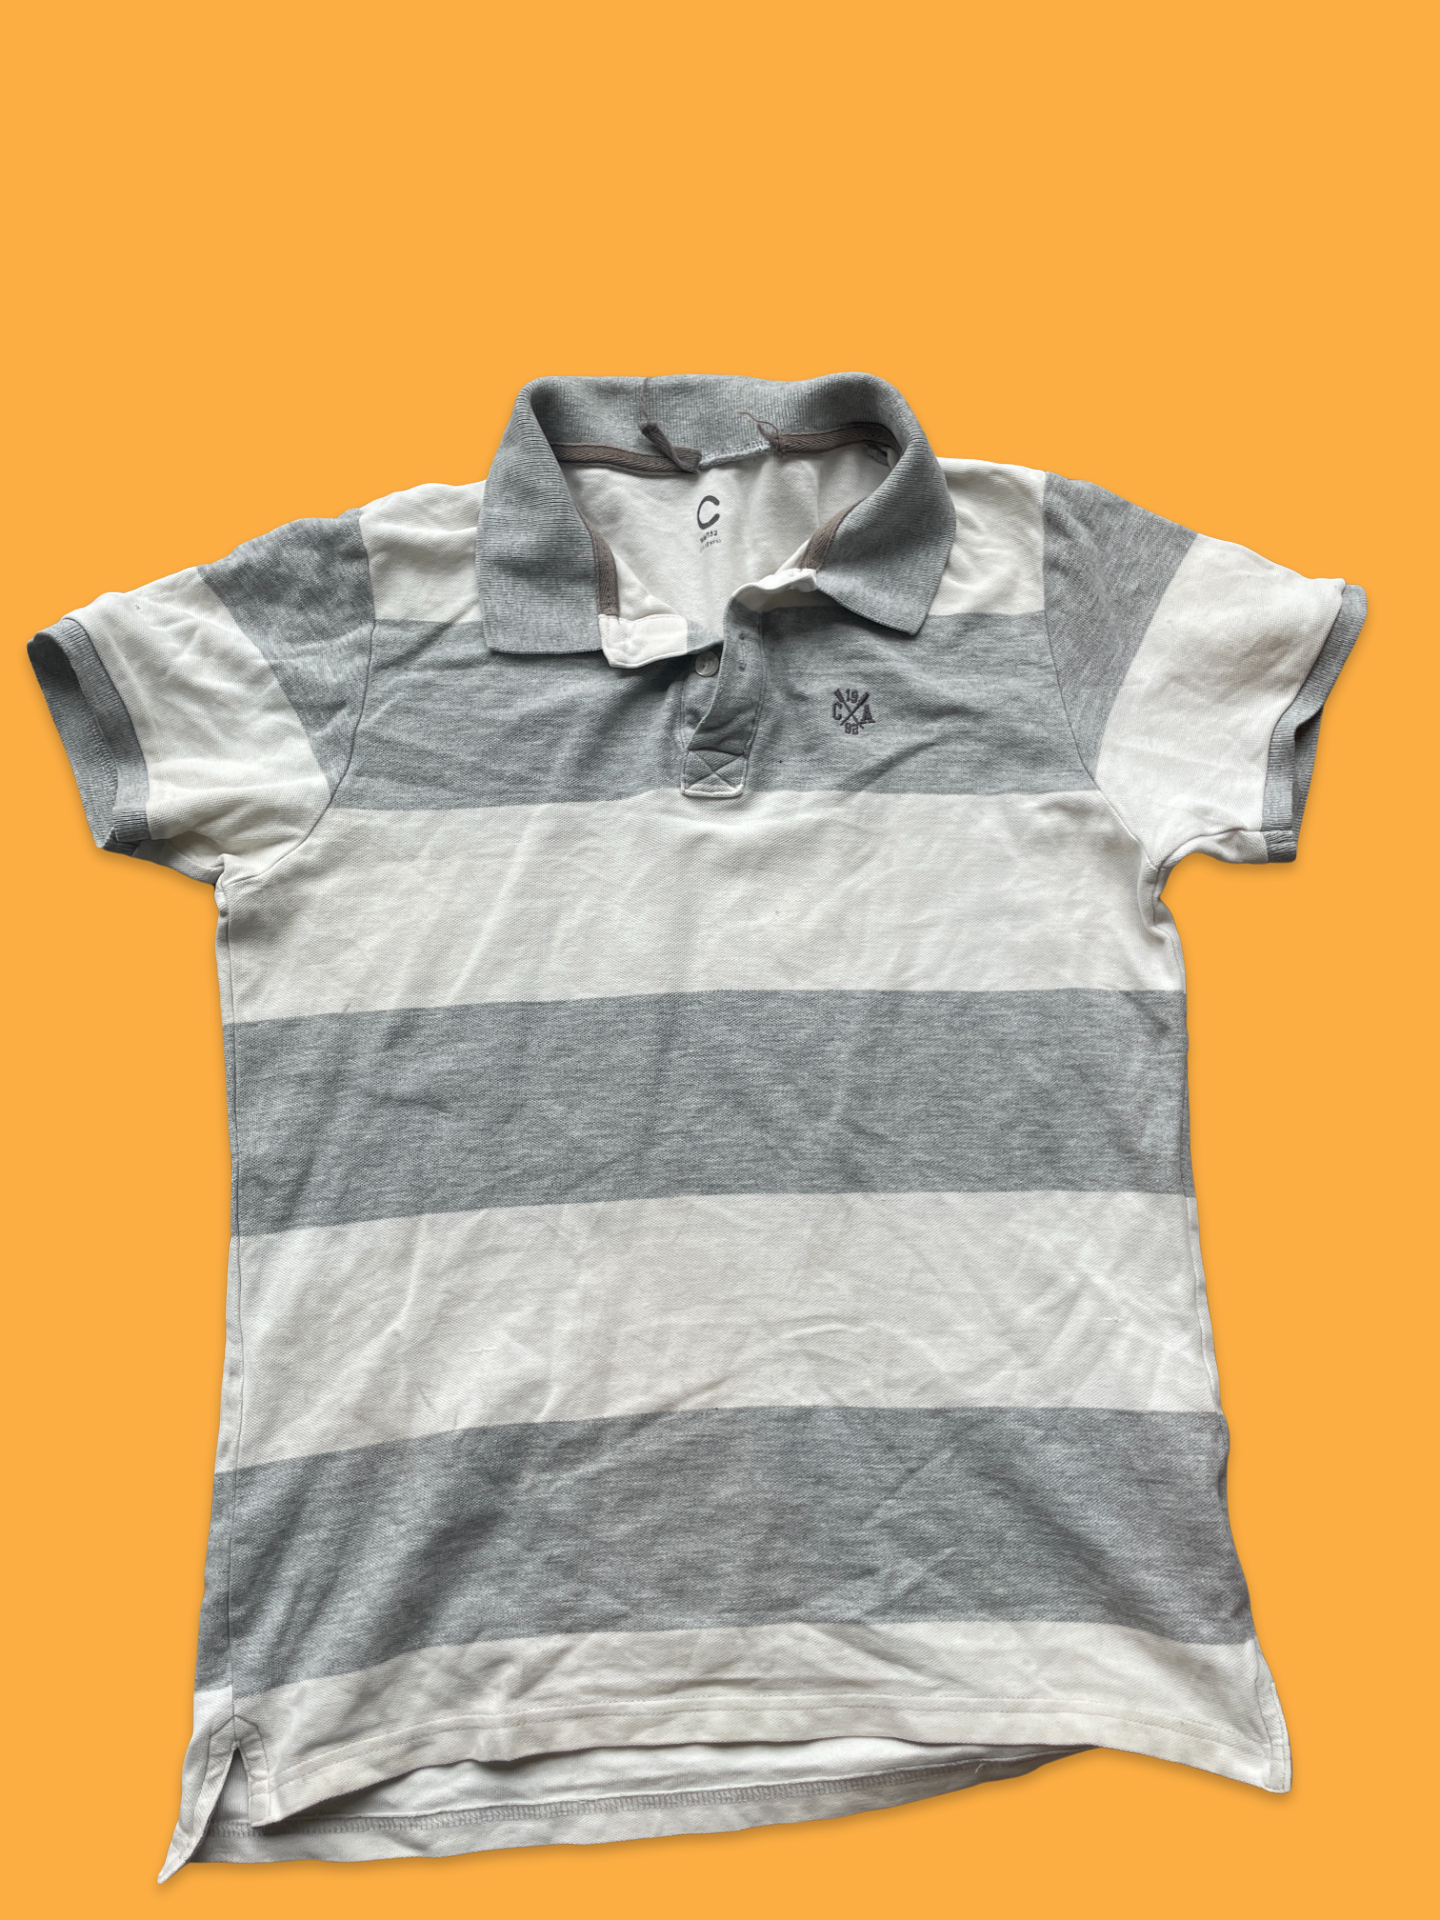 Rubynee Vintage y2k Jack and jones polo shirt in grey and white